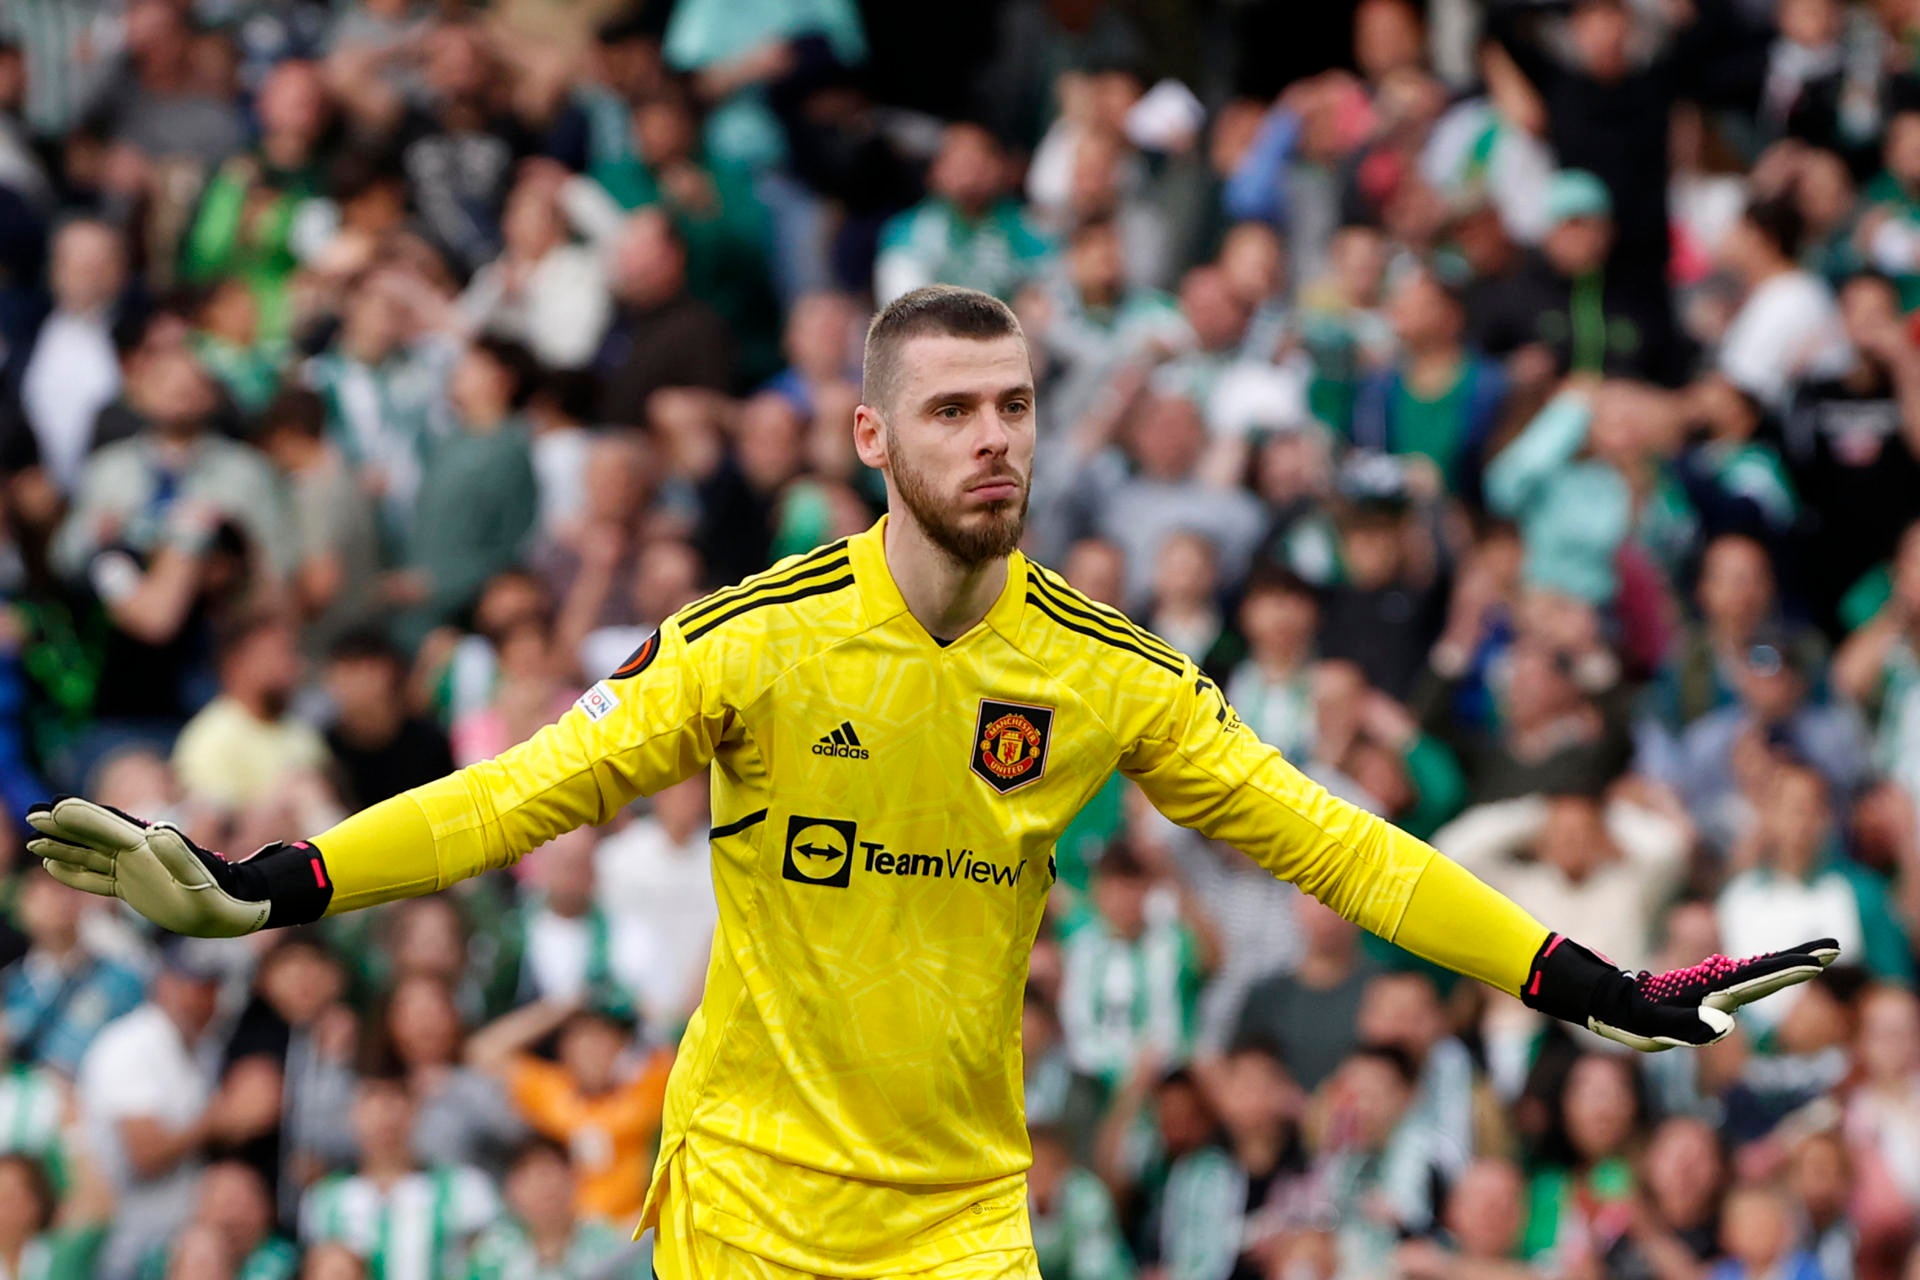 According to 'The Athletic', David de Gea signed his renewal with Manchester United but the English club backed out and tried to reduce his salary in a new deal.